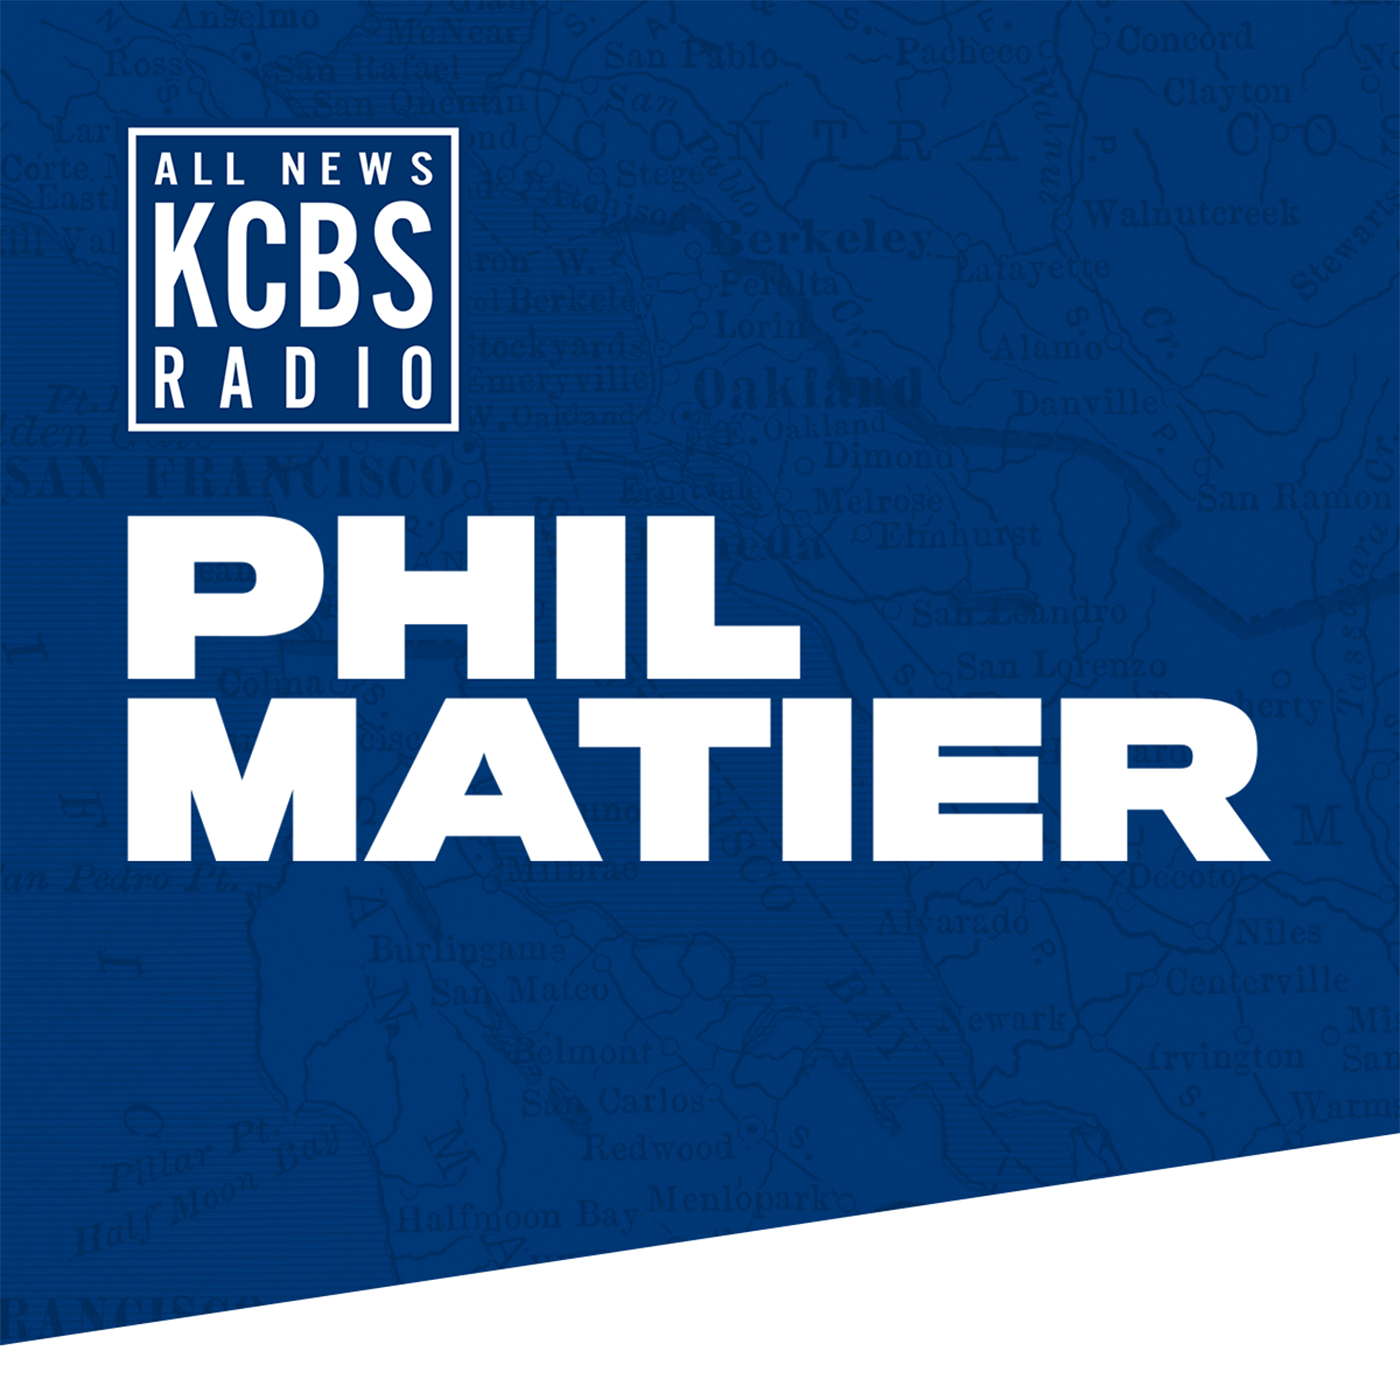 Phil Matier: SF's Plan To Eliminate Traffic Related Fatalities